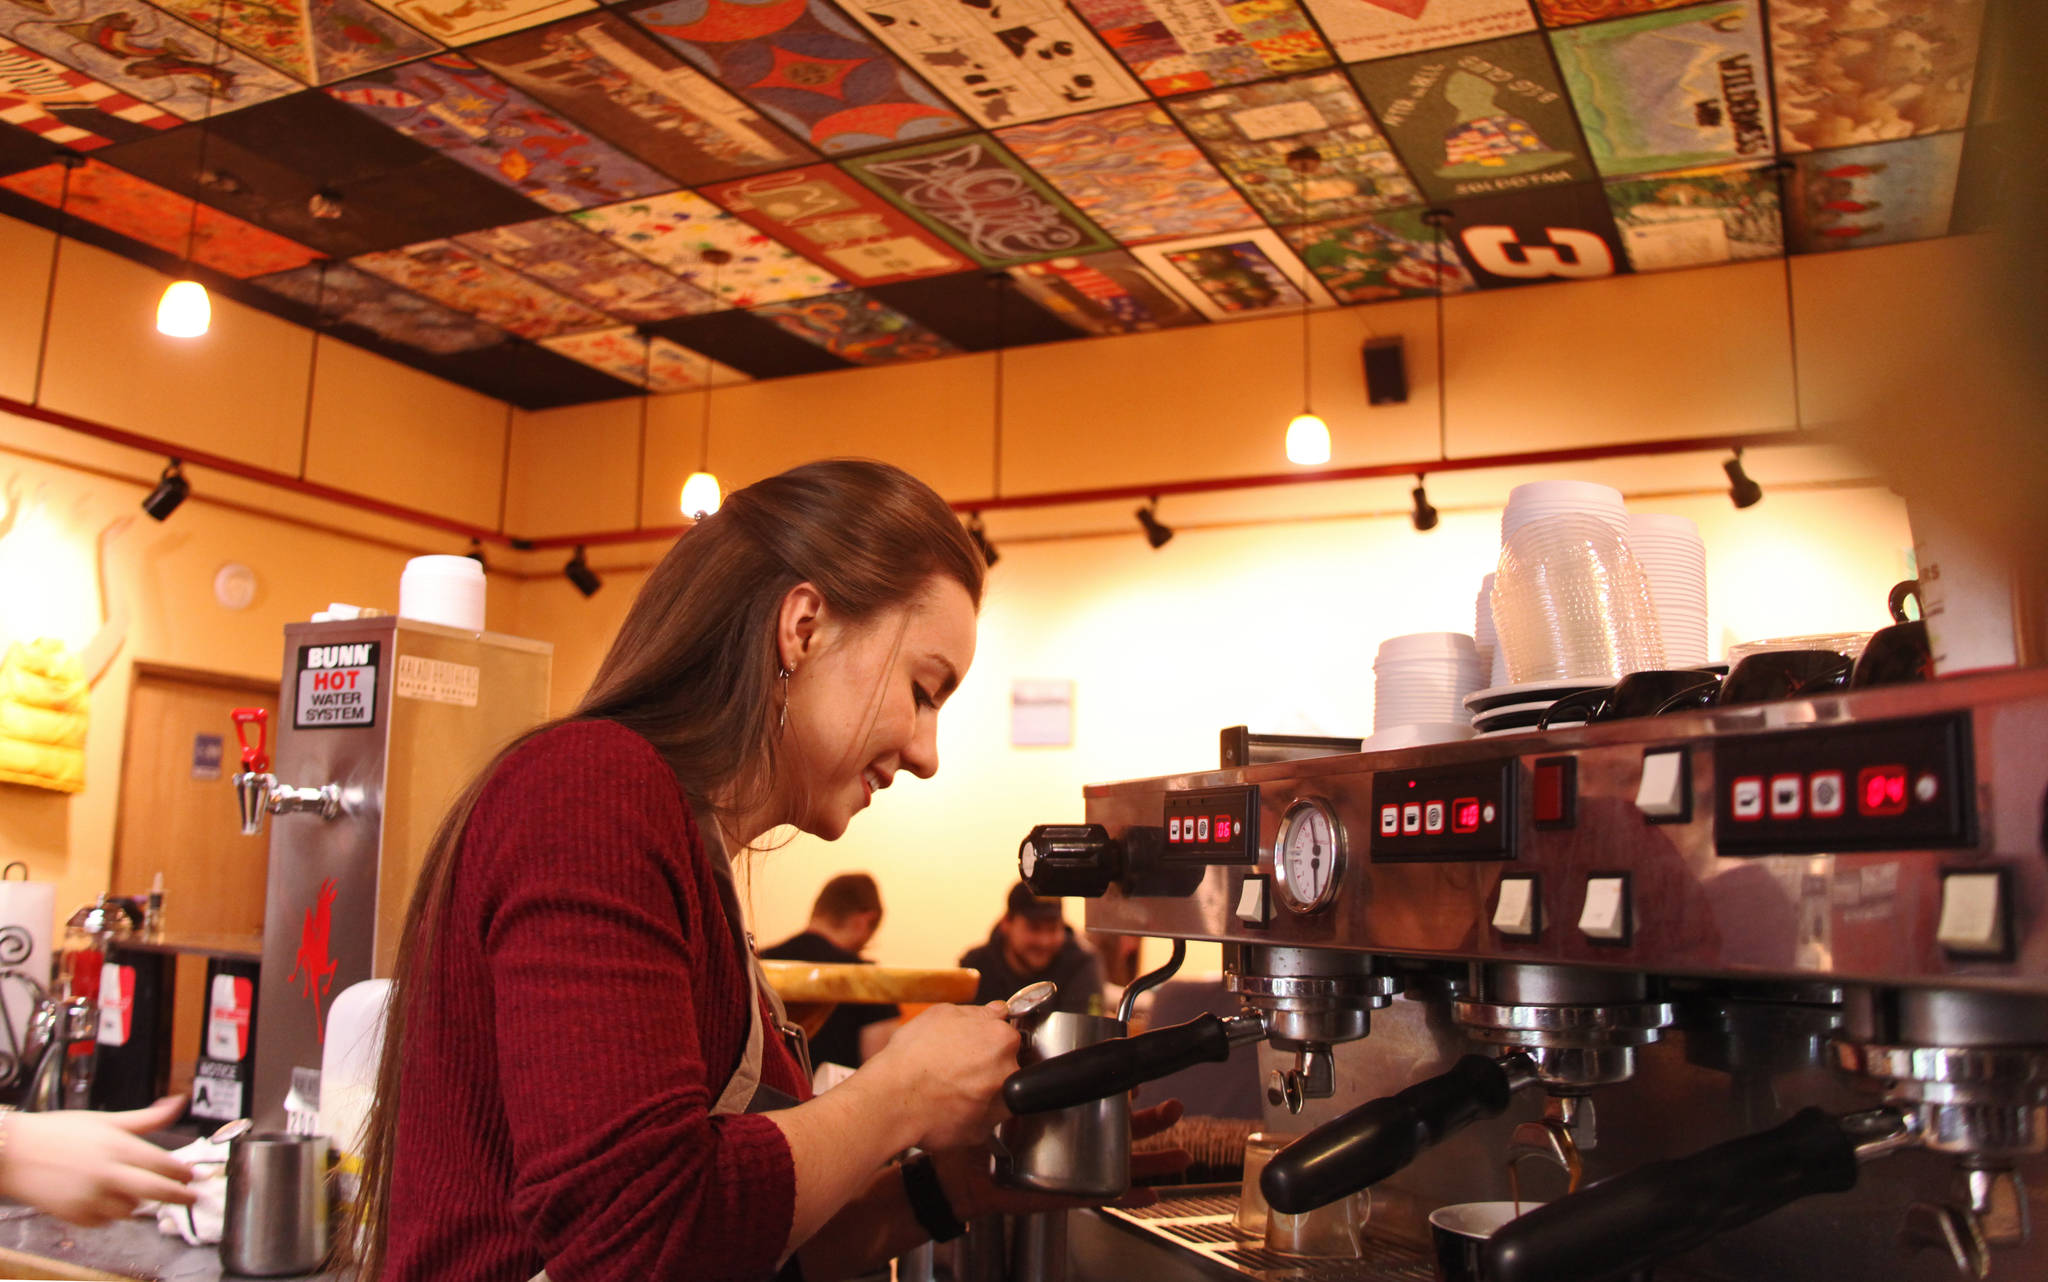 With the shop’s distinctive painted cieling panels above her, barrista Sarah Rawson steams milk to make a latte at Kaladi Brother’s Coffee during a busy evening on Saturday, Jan. 13 in Soldotna. Rawson and fellow barrista Hallie Riddall practiced latte art — creating designs by carefully and precisely pouring steamed milk into coffee — between serving customers Saturday evening. (Ben Boettger/Peninsula Clarion)